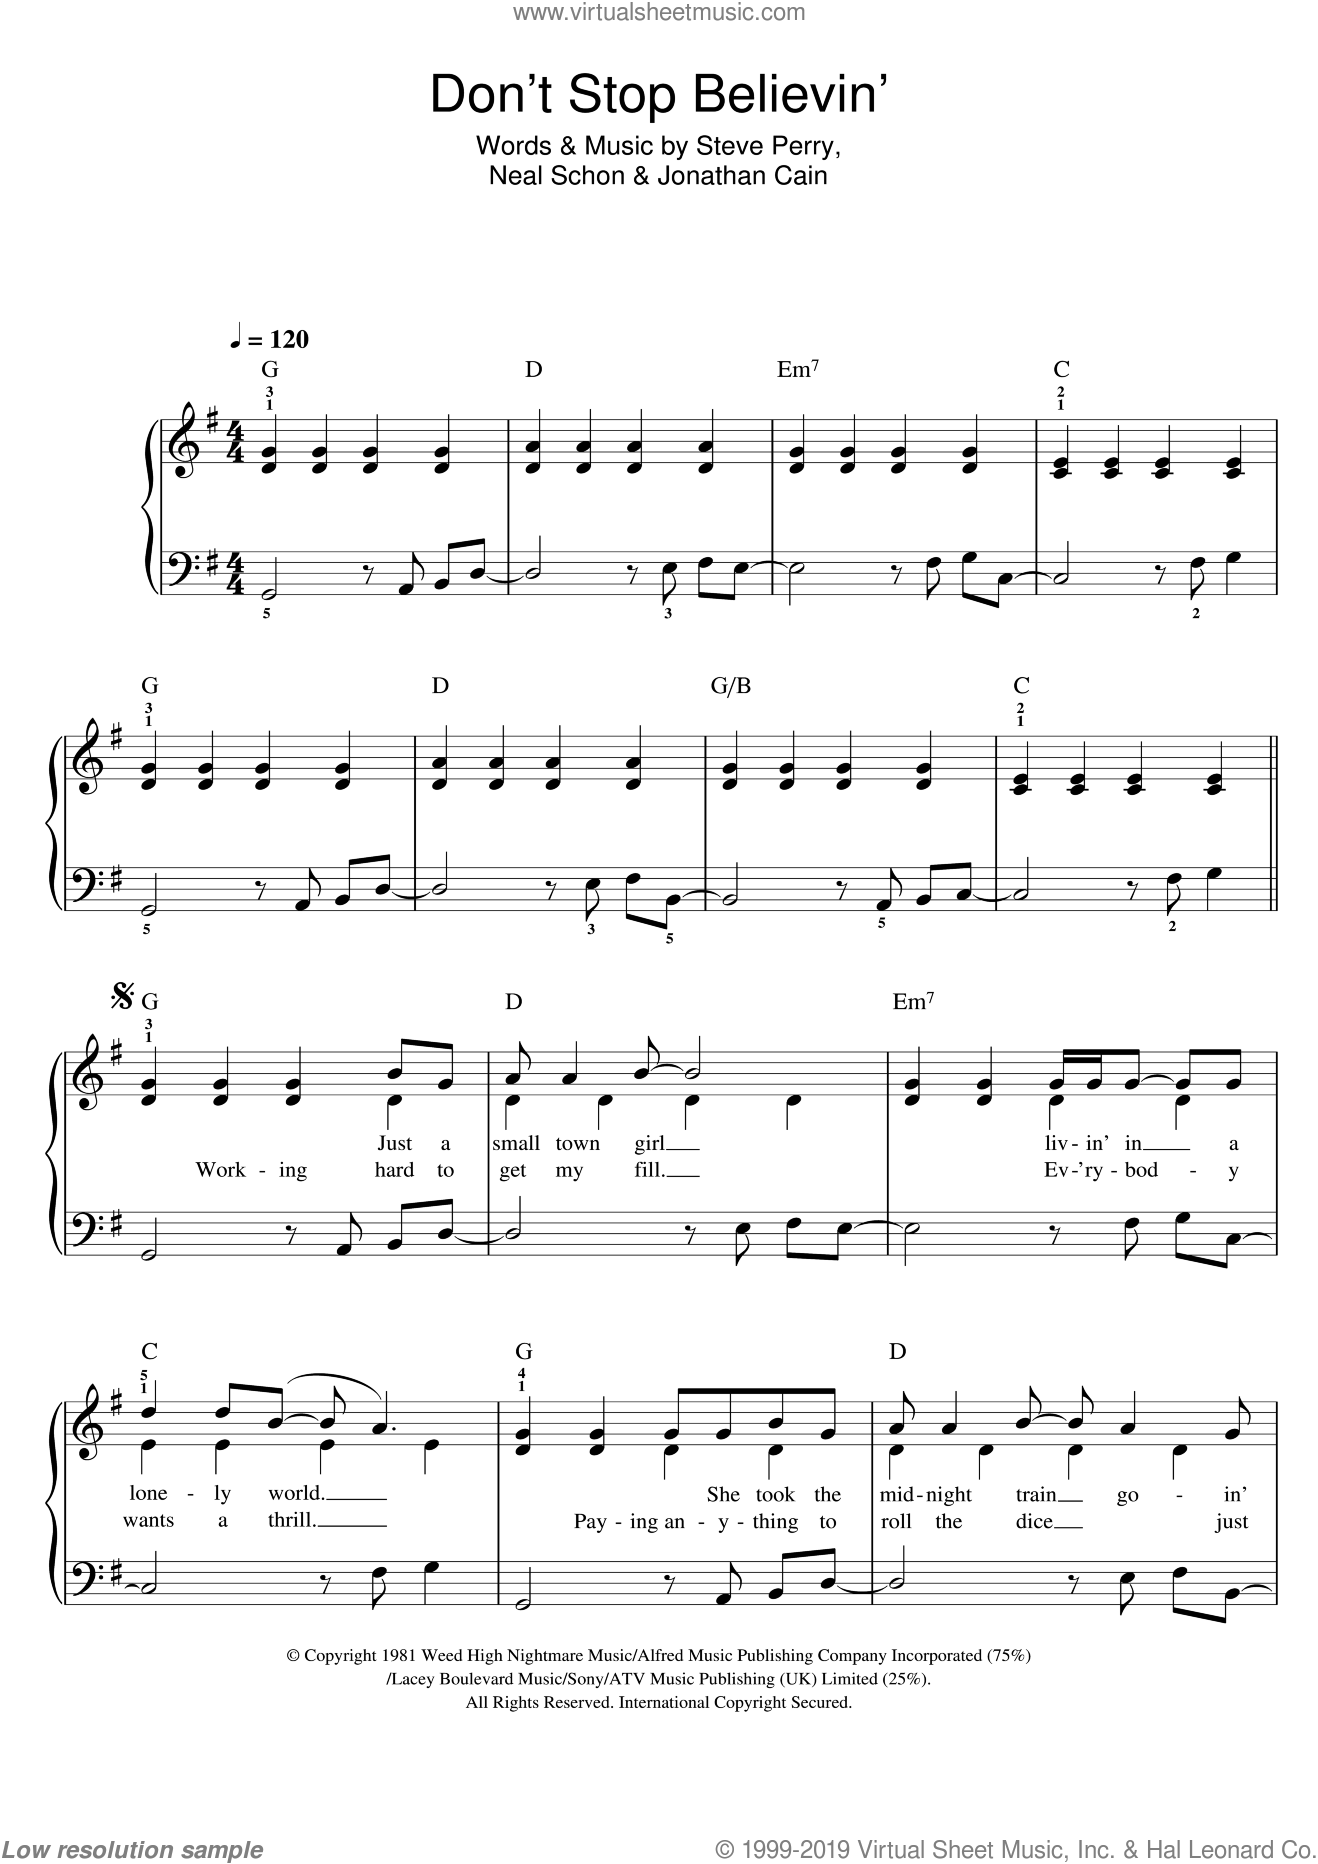 Cast - Don't Stop Believin' sheet music for piano solo [PDF]